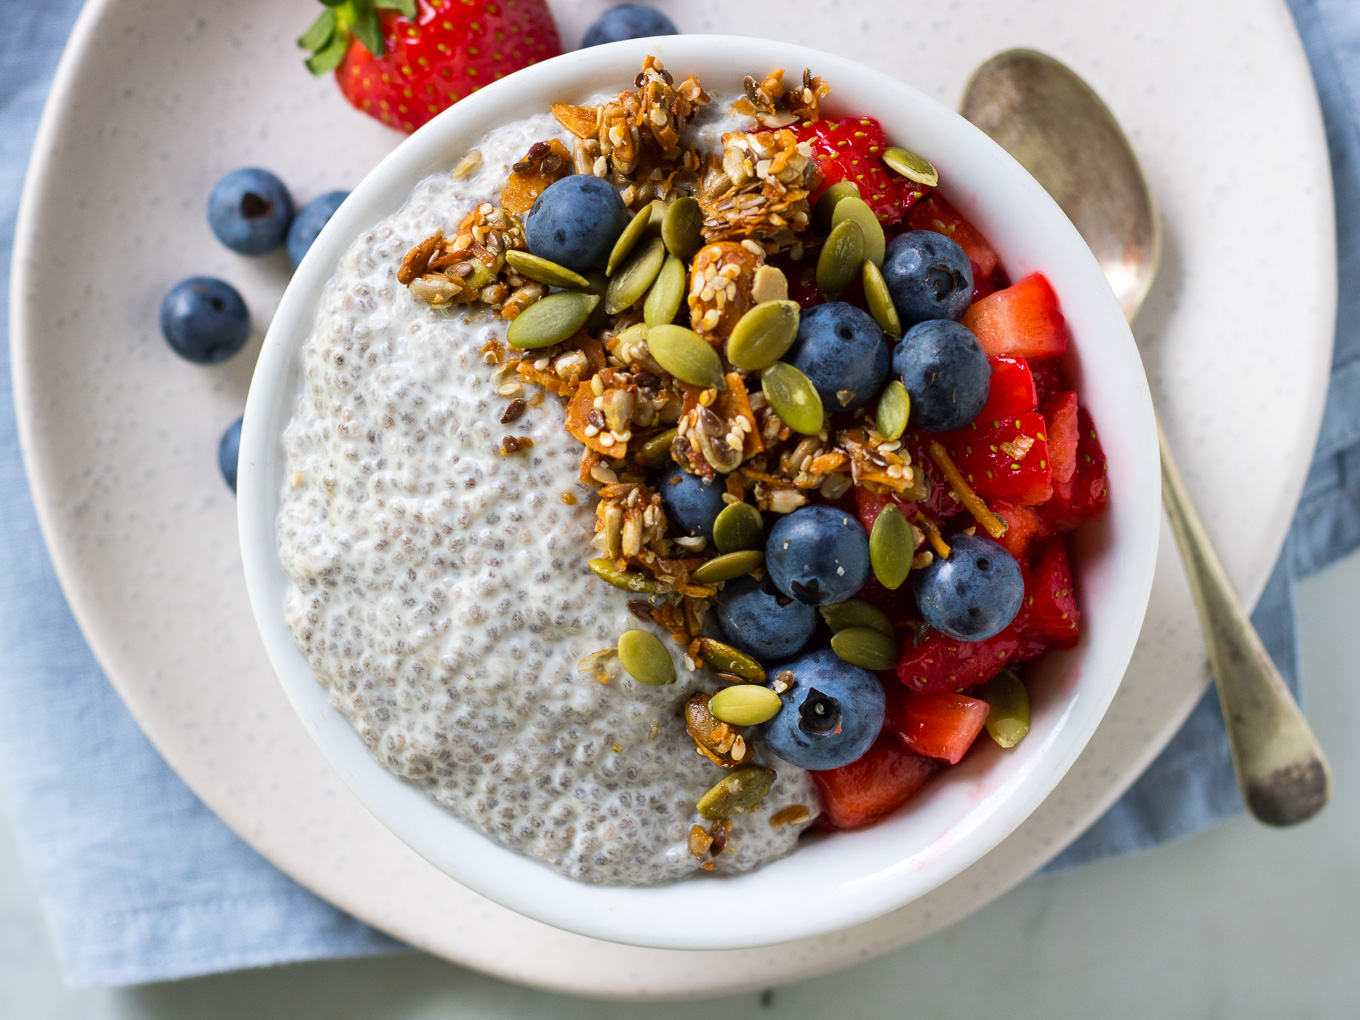 A simple vanilla chia pudding served up with fresh berries and crunchy granola!